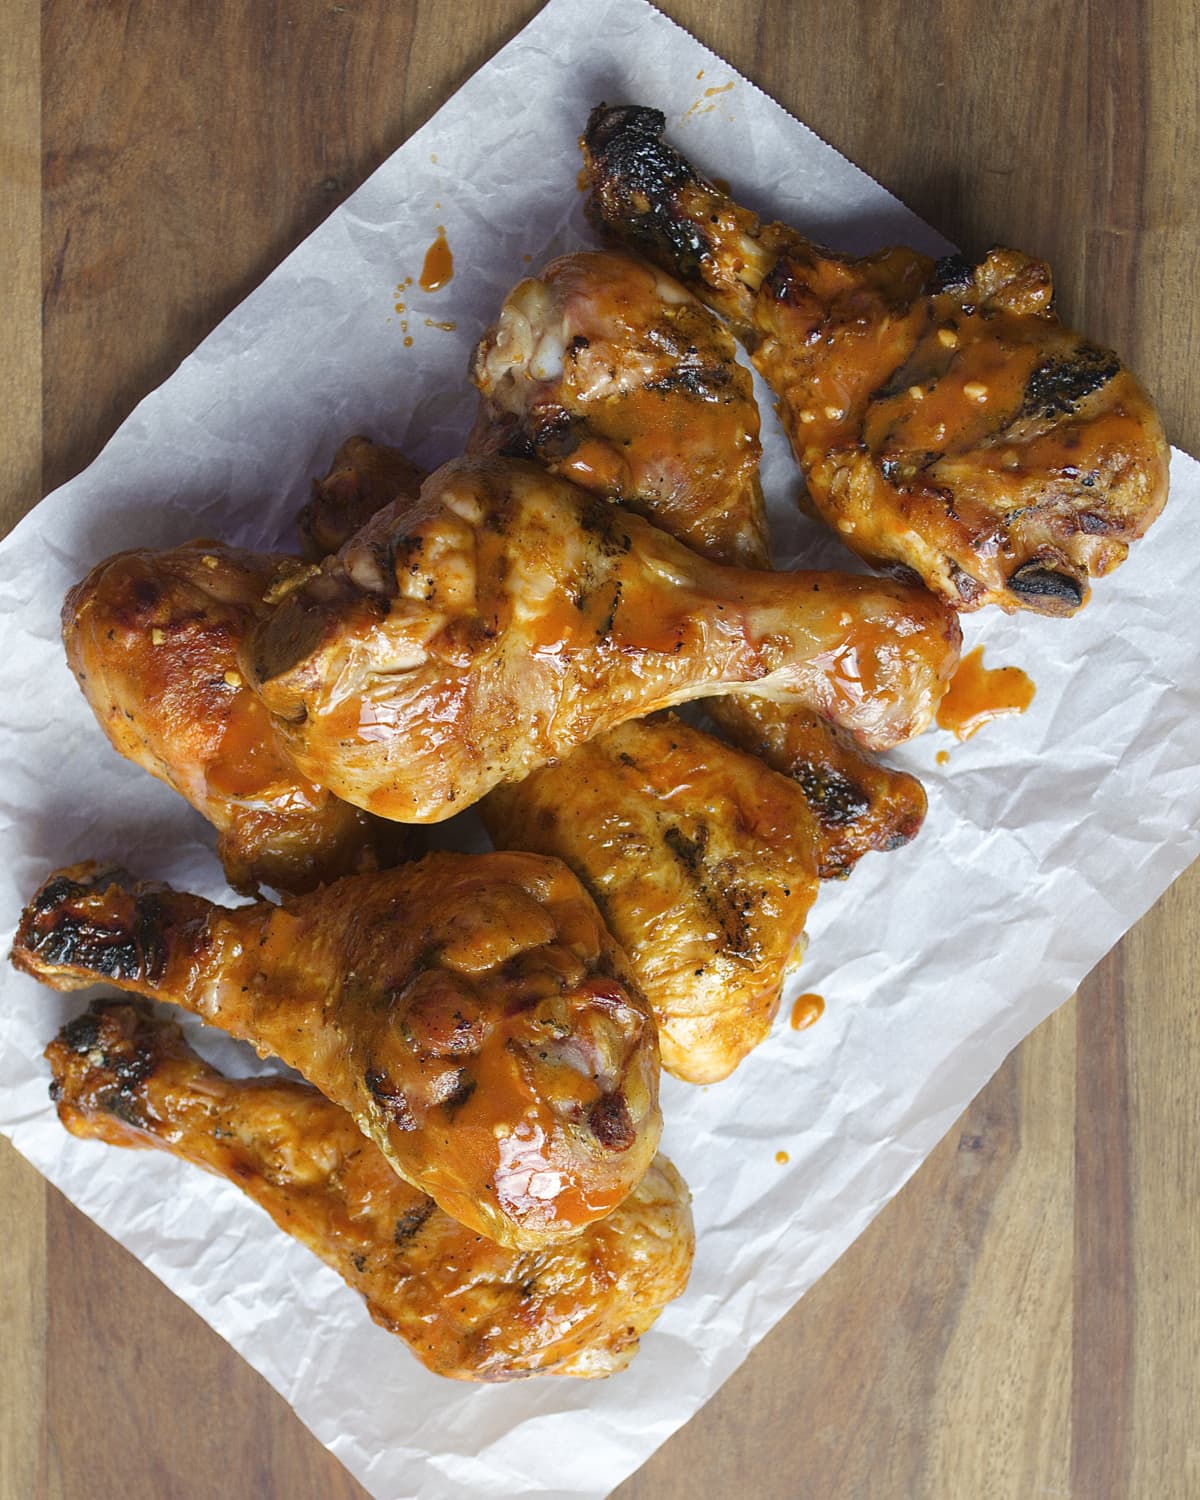 These Smoked Drumsticks are smoked until perfectly tender then tossed in a tangy buffalo sauce! Ready in 30 minutes and a major crowd pleaser!